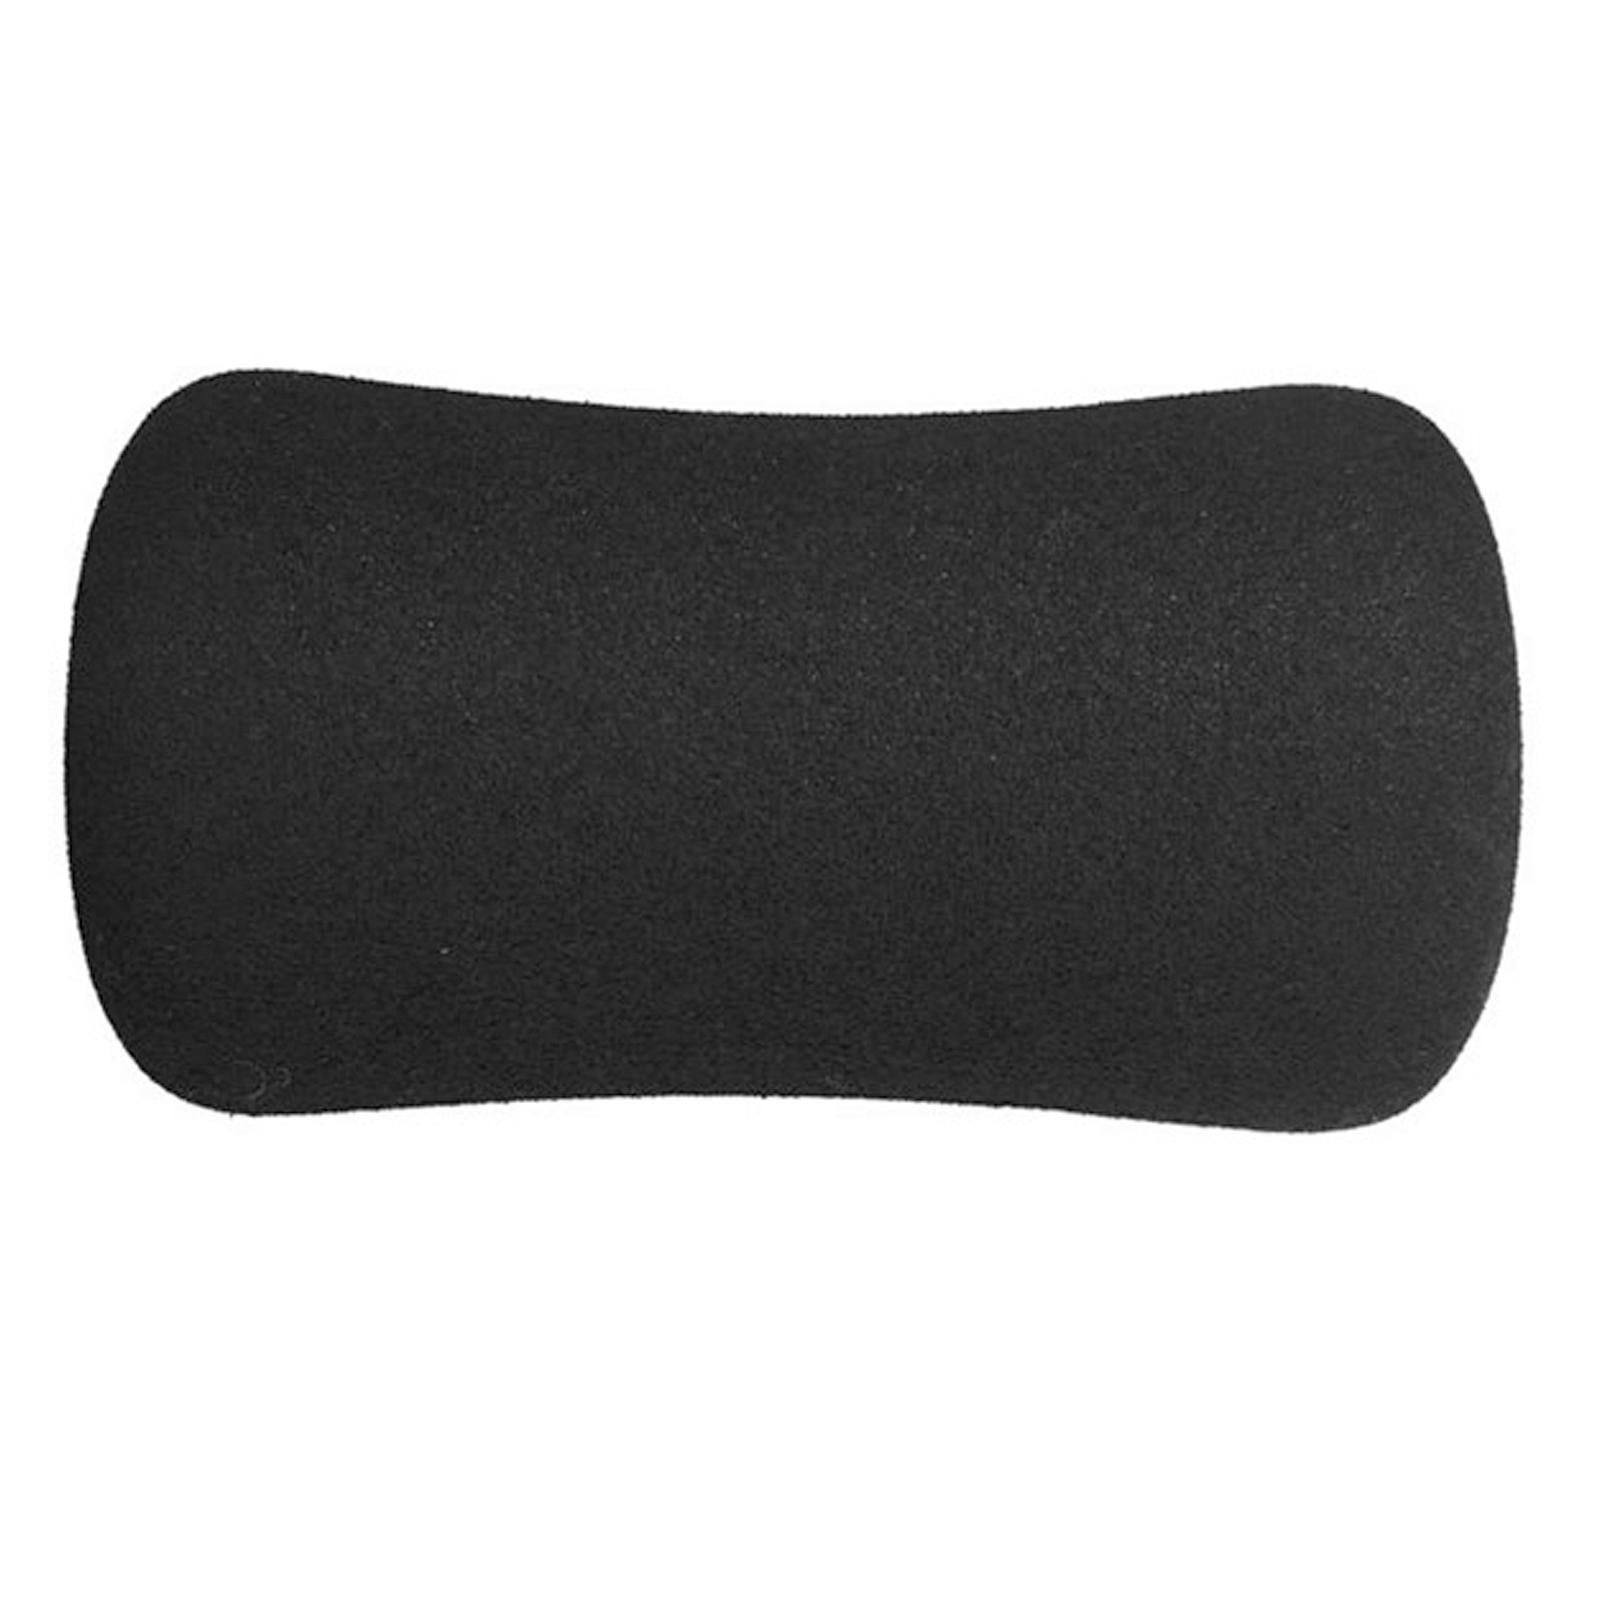 1 Pack Foam Grips for Home Gym Sit up Bar Machines Exercise Core Strength 22cm